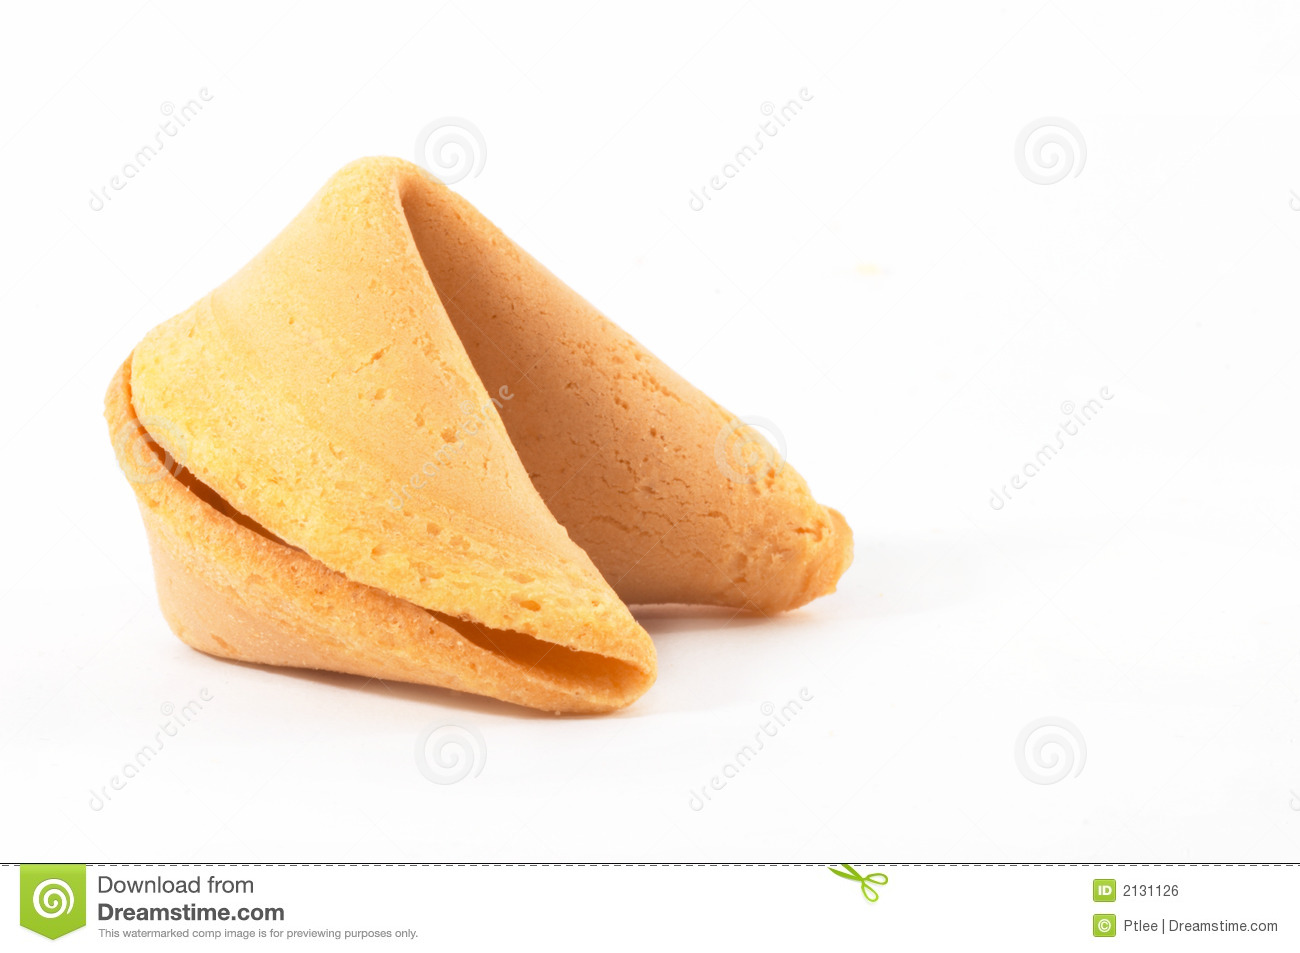 Chinese Fortune Cookie From Si Royalty Free Stock Image   Image    